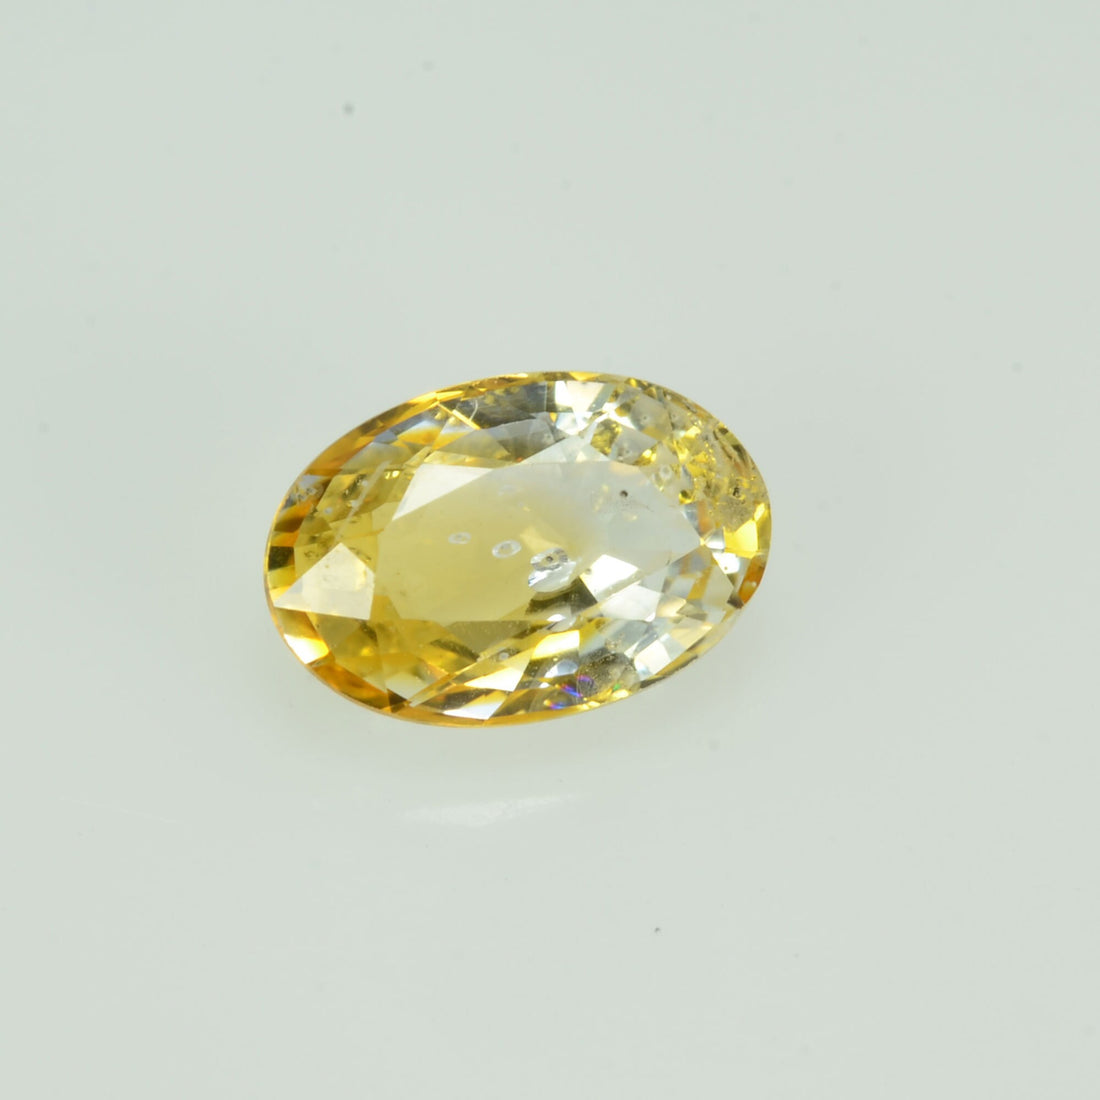 0.64 cts Natural Yellow Sapphire Loose Gemstone Oval Cut